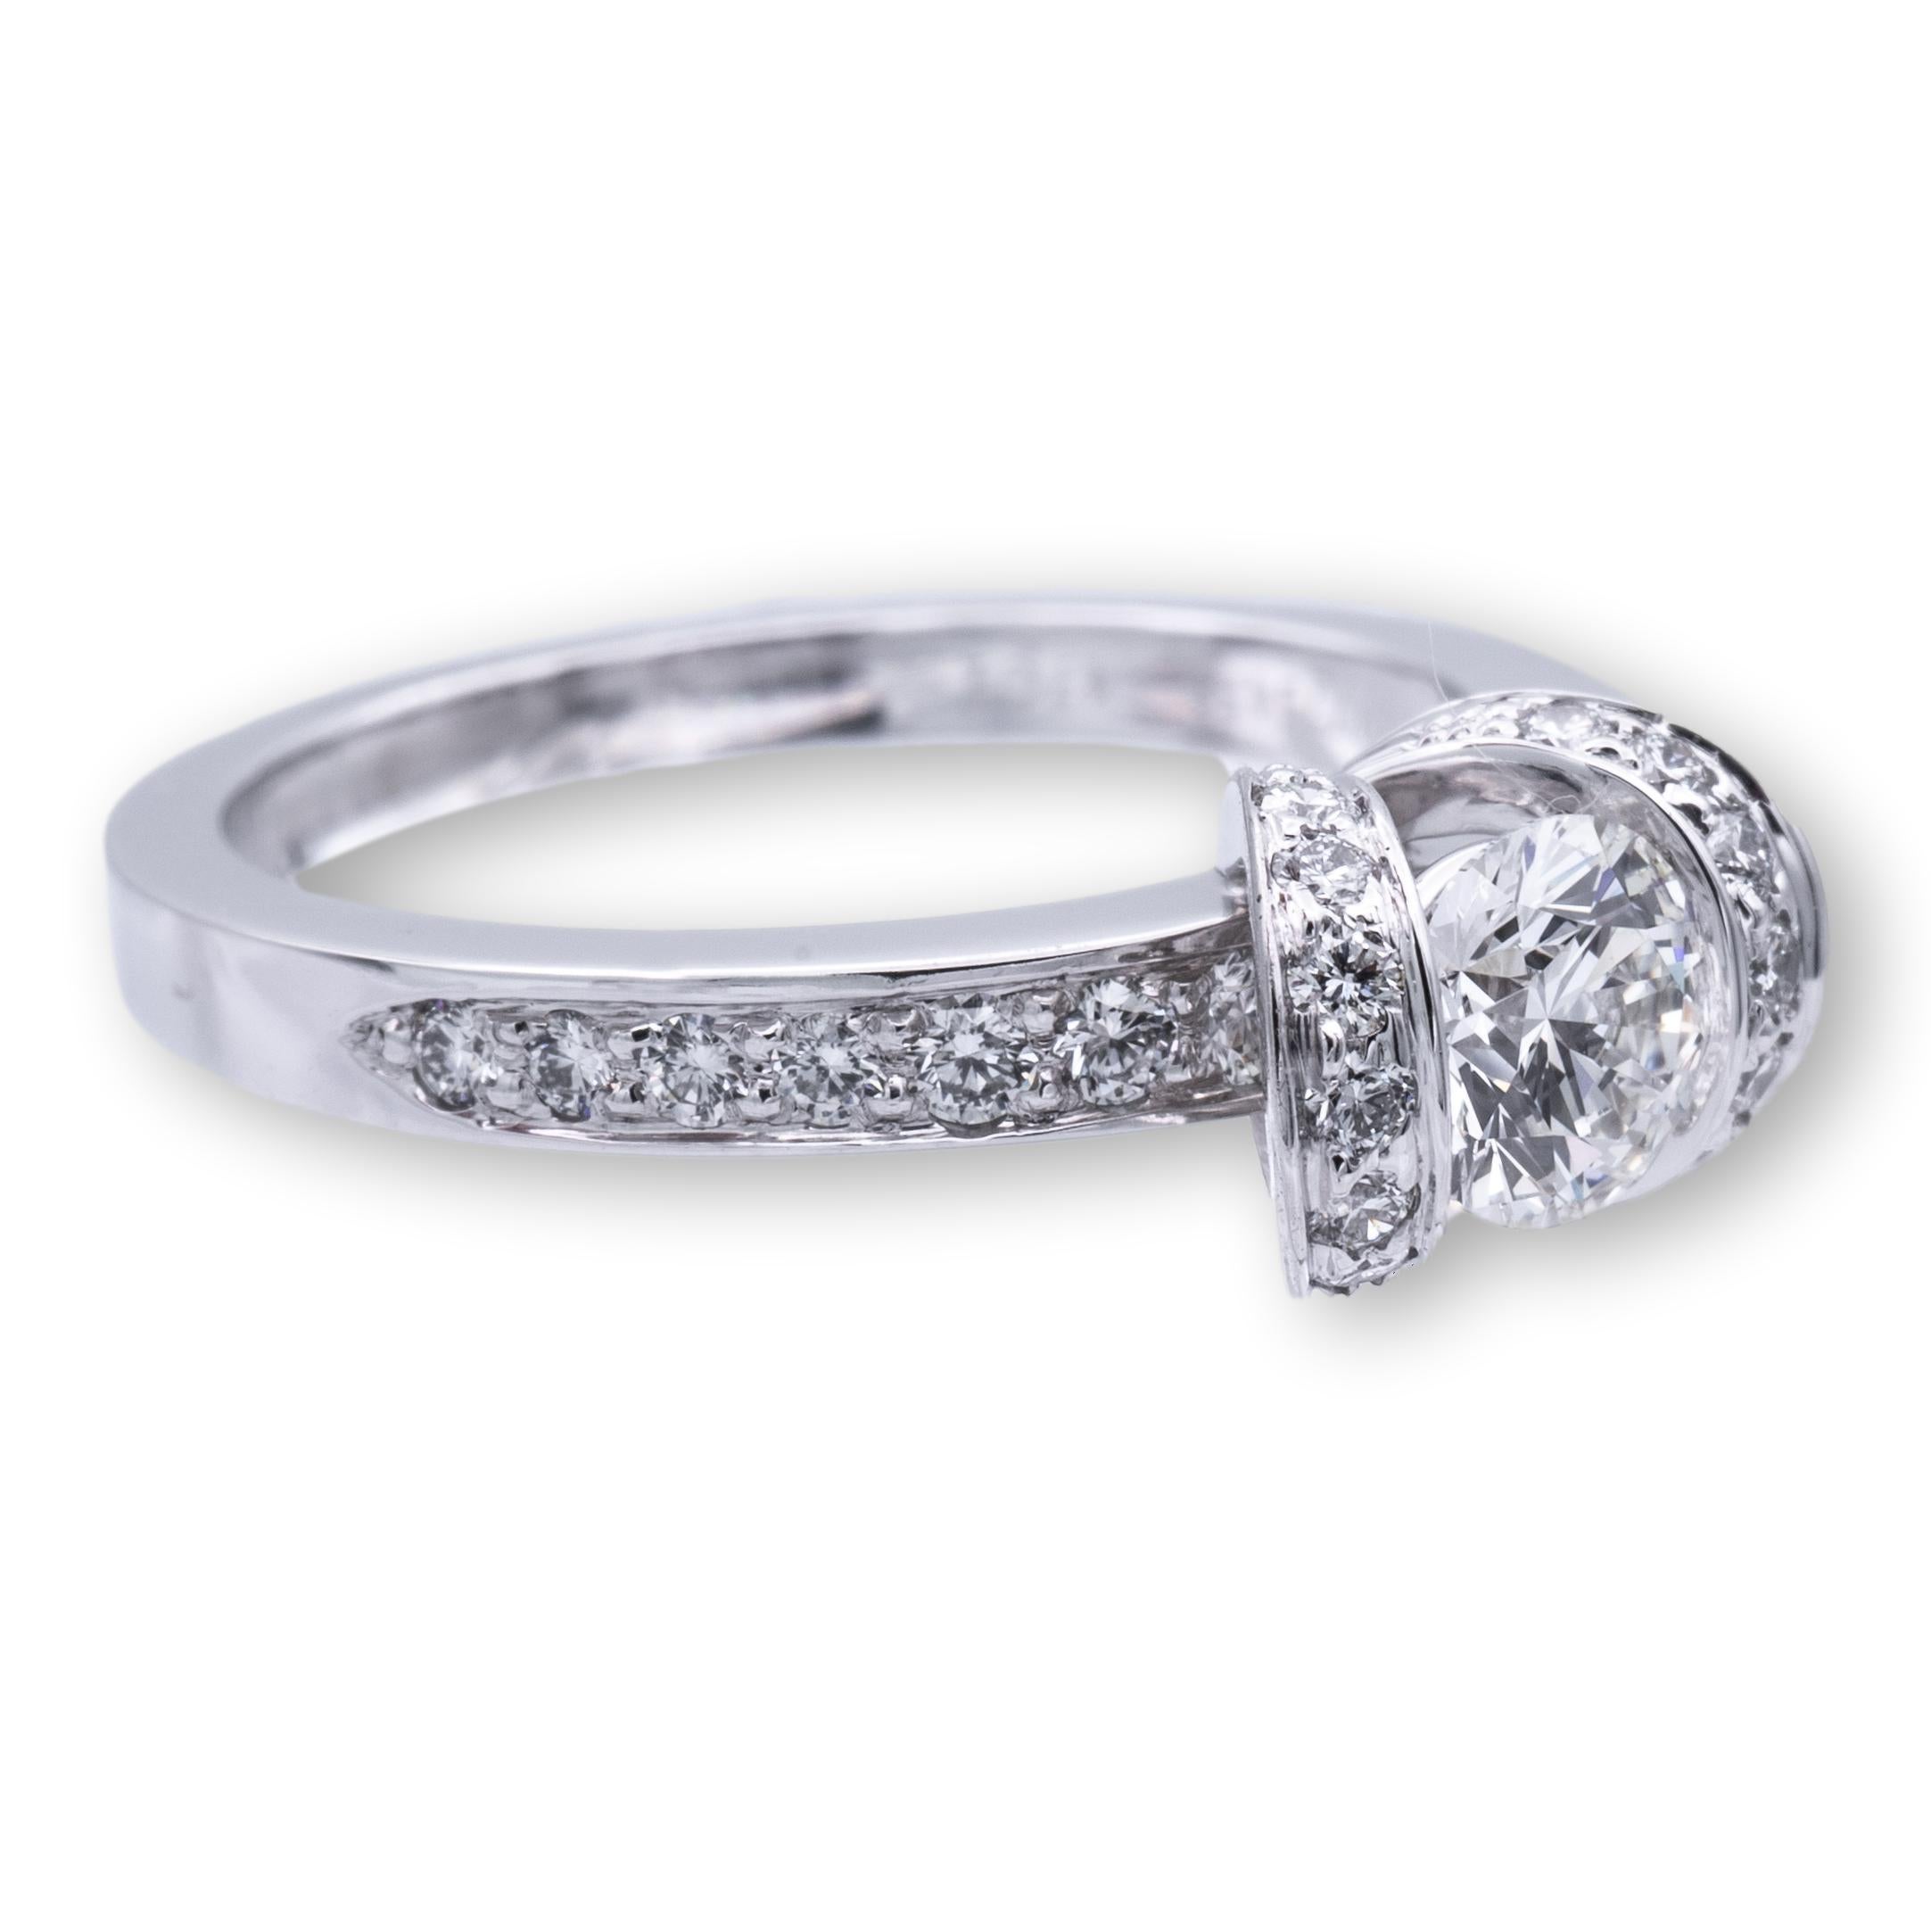 Tiffany & Co. Ribbon engagement ring finely crafted in platinum with a 0.47 ct round brilliant cut center diamond G color VVS2 clarity. The ring has channel set diamonds on each side weighing 0.36 carats total weight approximately. The center